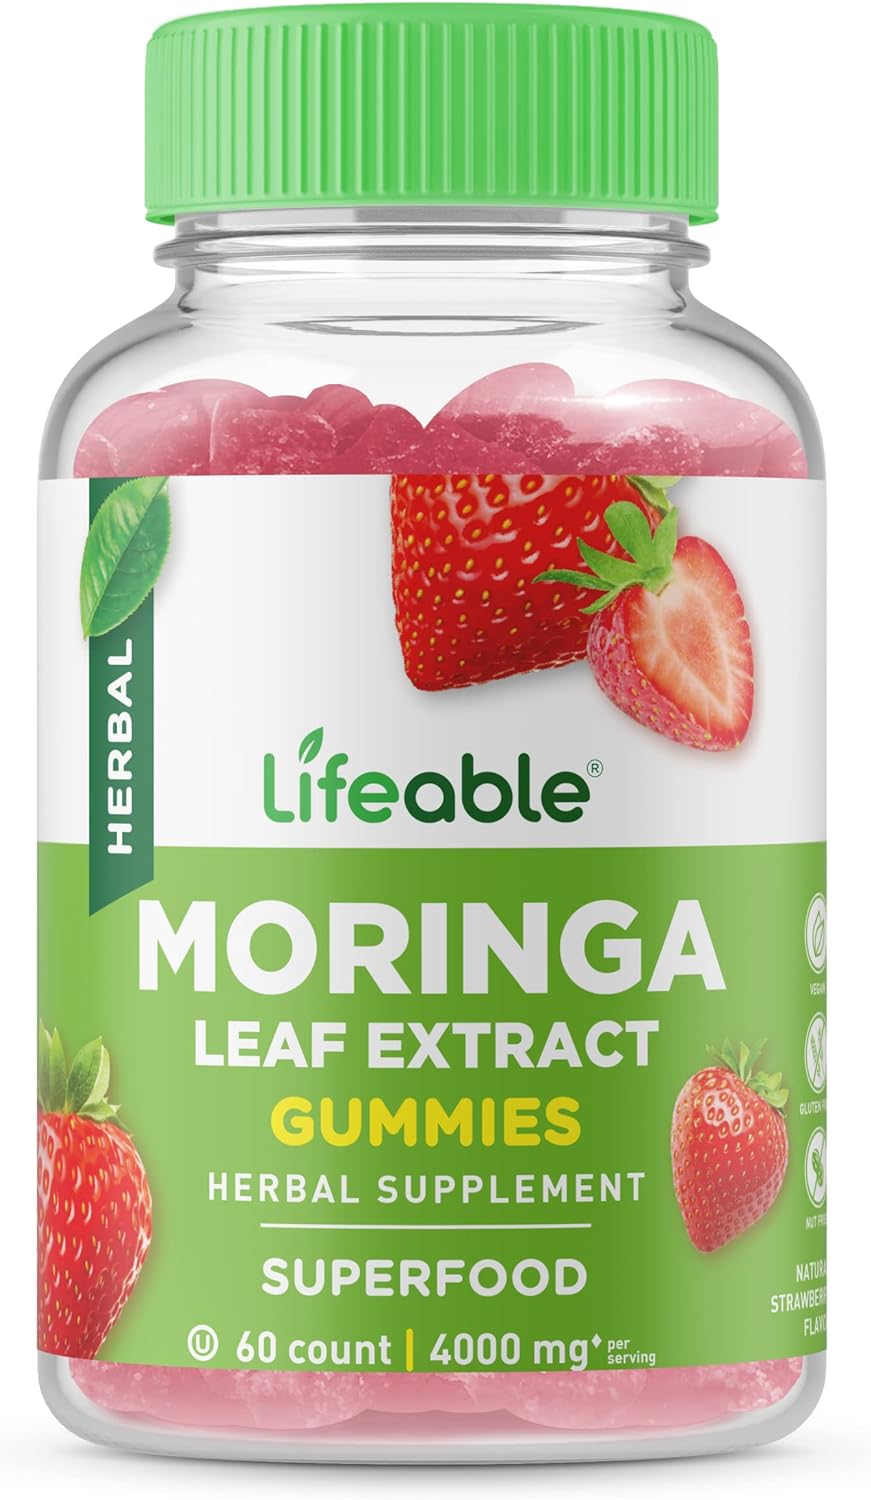 Lifeable Moringa Leaf Extract 4000mg - Great Tasting Natural Flavor Gummy Supplement Vitamins - Non-GMO Gluten Free Vegan Chewable - Antioxidant Packed Superfood - for Men Women - 60 Gummies